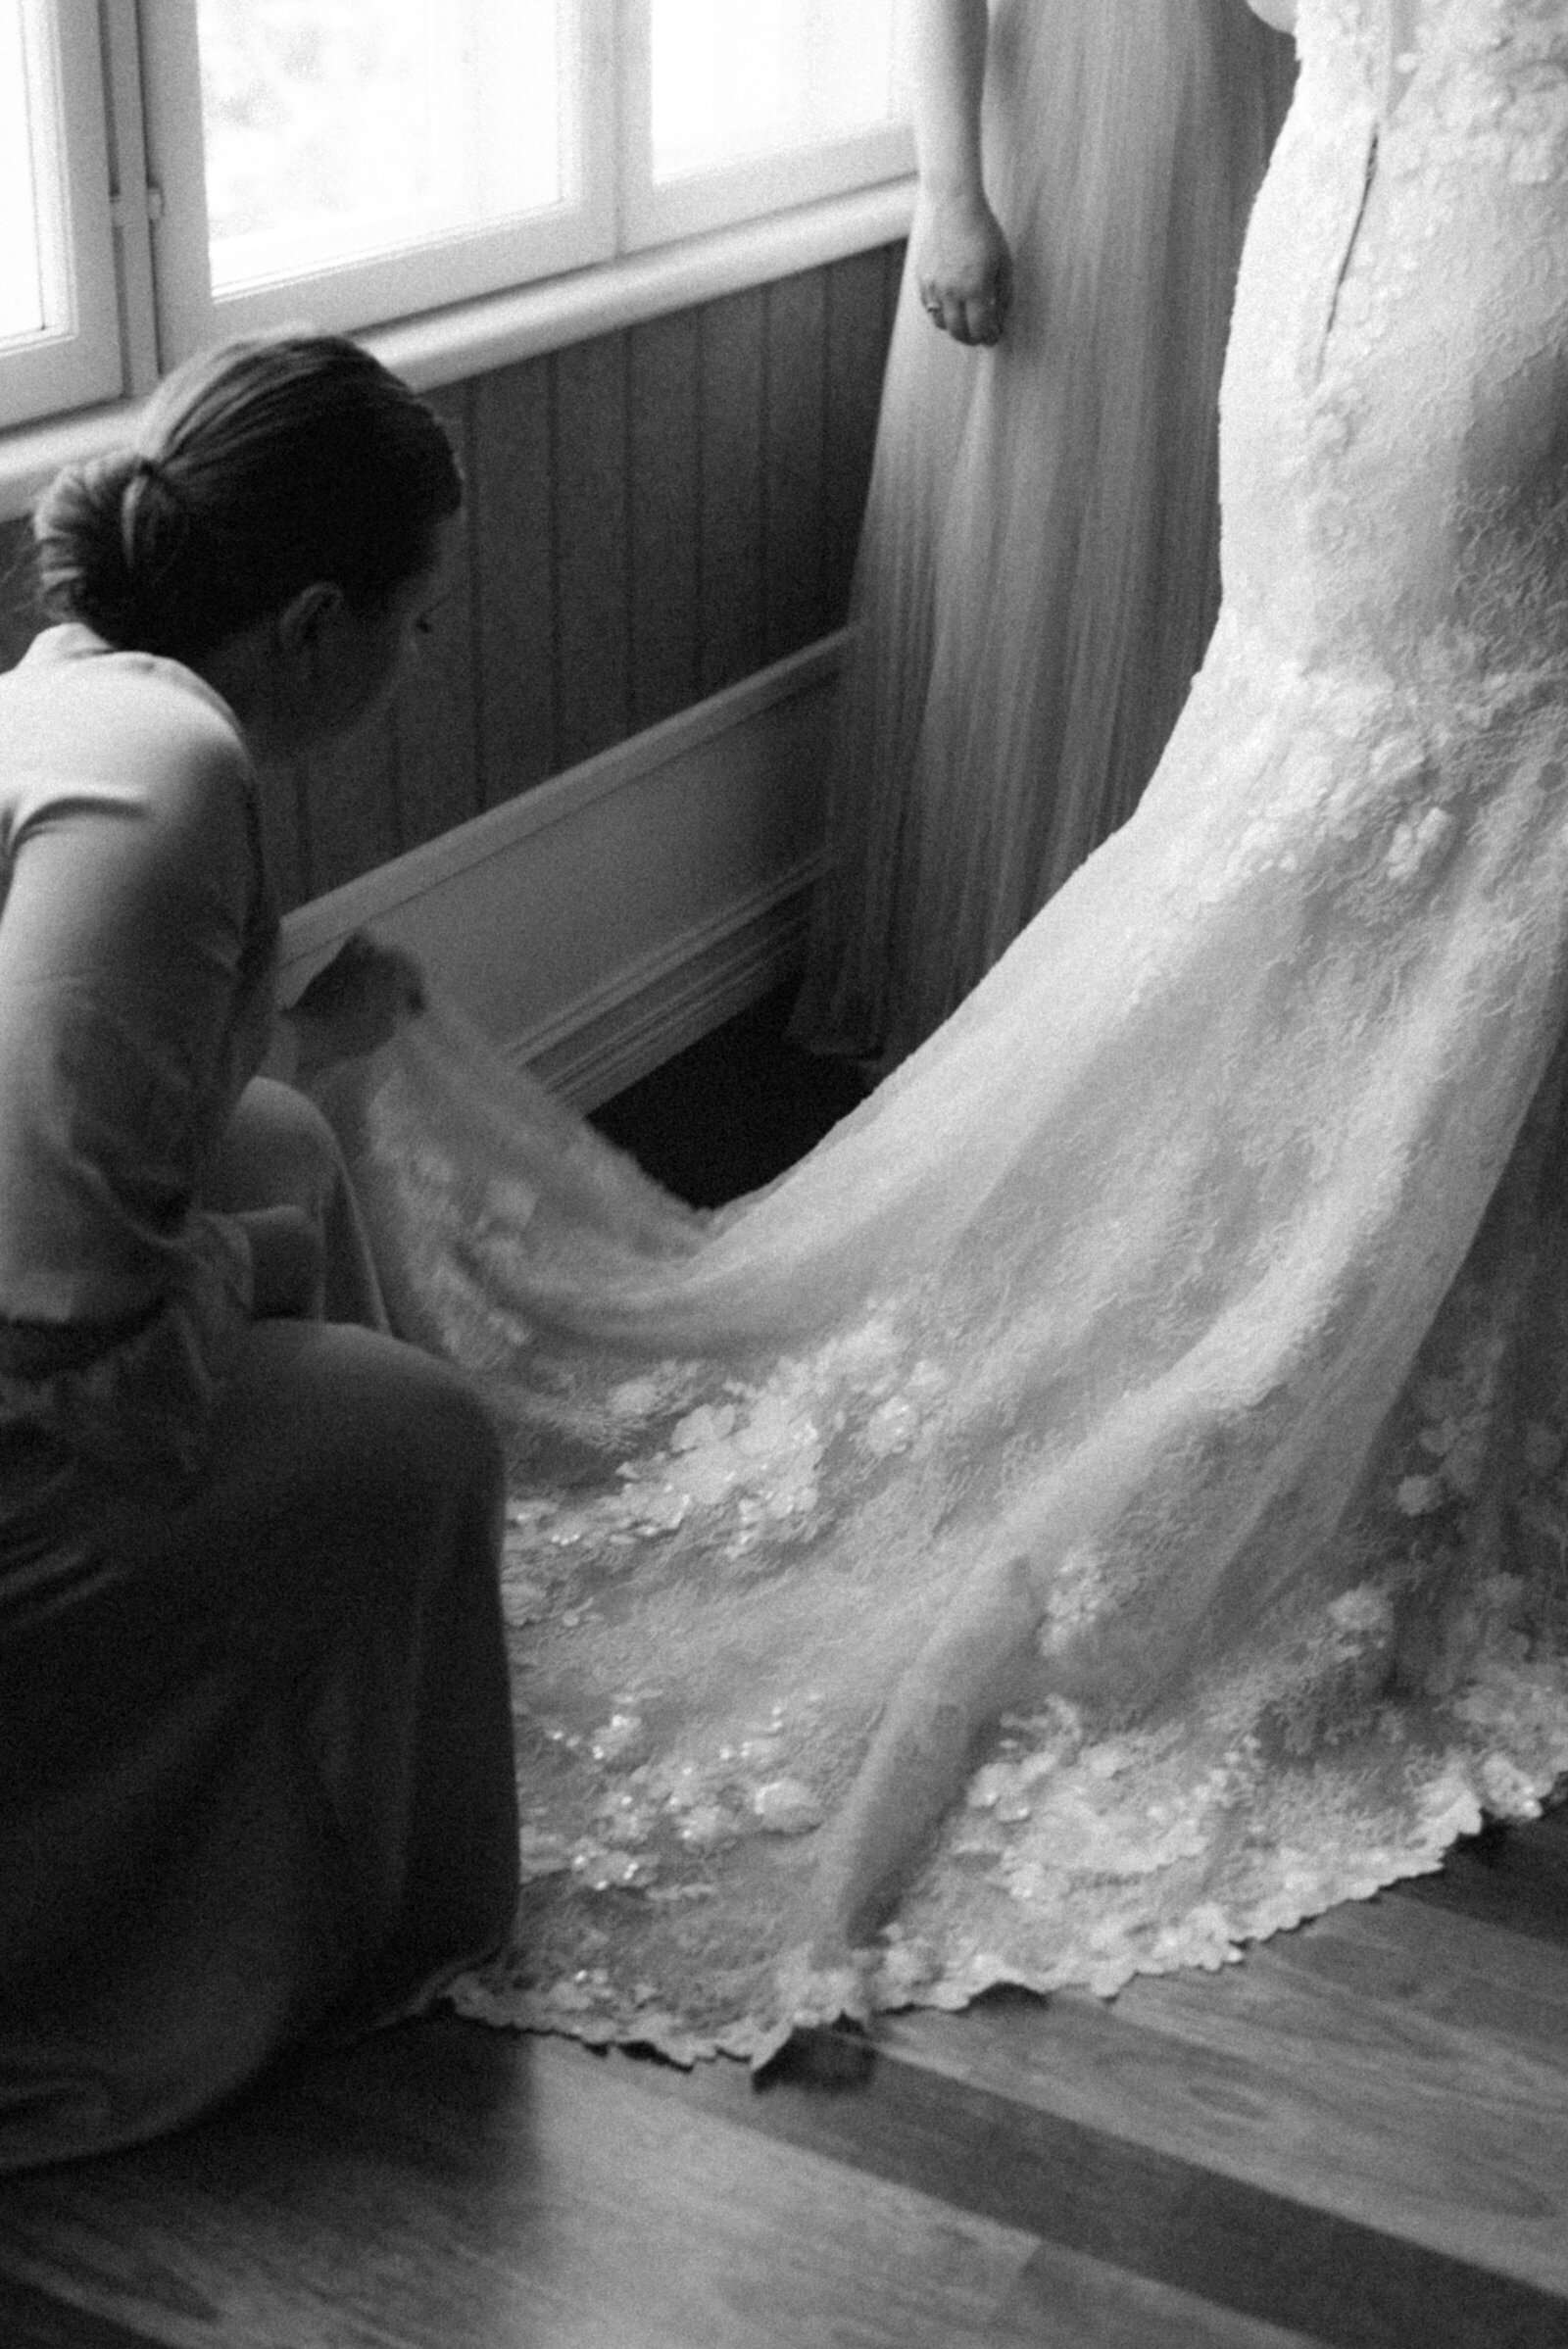 Bridesmaid setting the tail of the wedding dress in an image photographed by wedding photographer Hannika Gabrielsson.